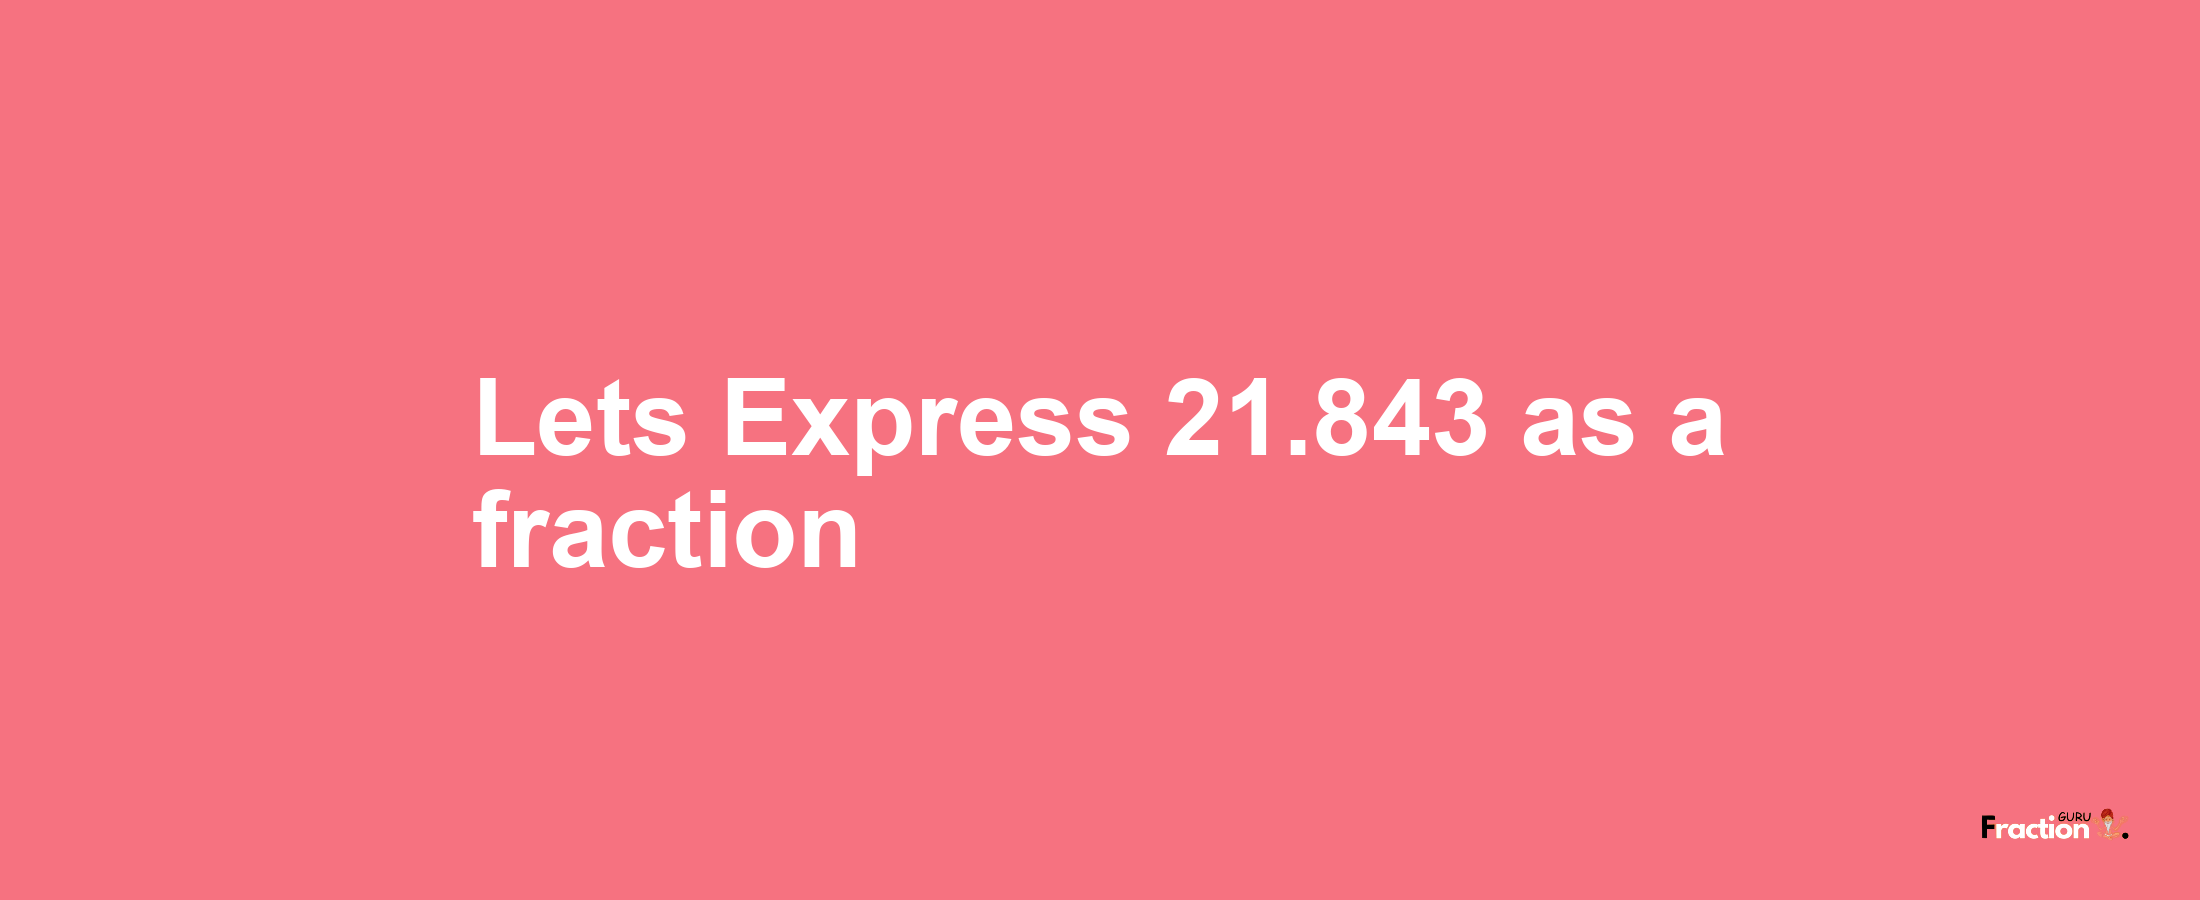 Lets Express 21.843 as afraction